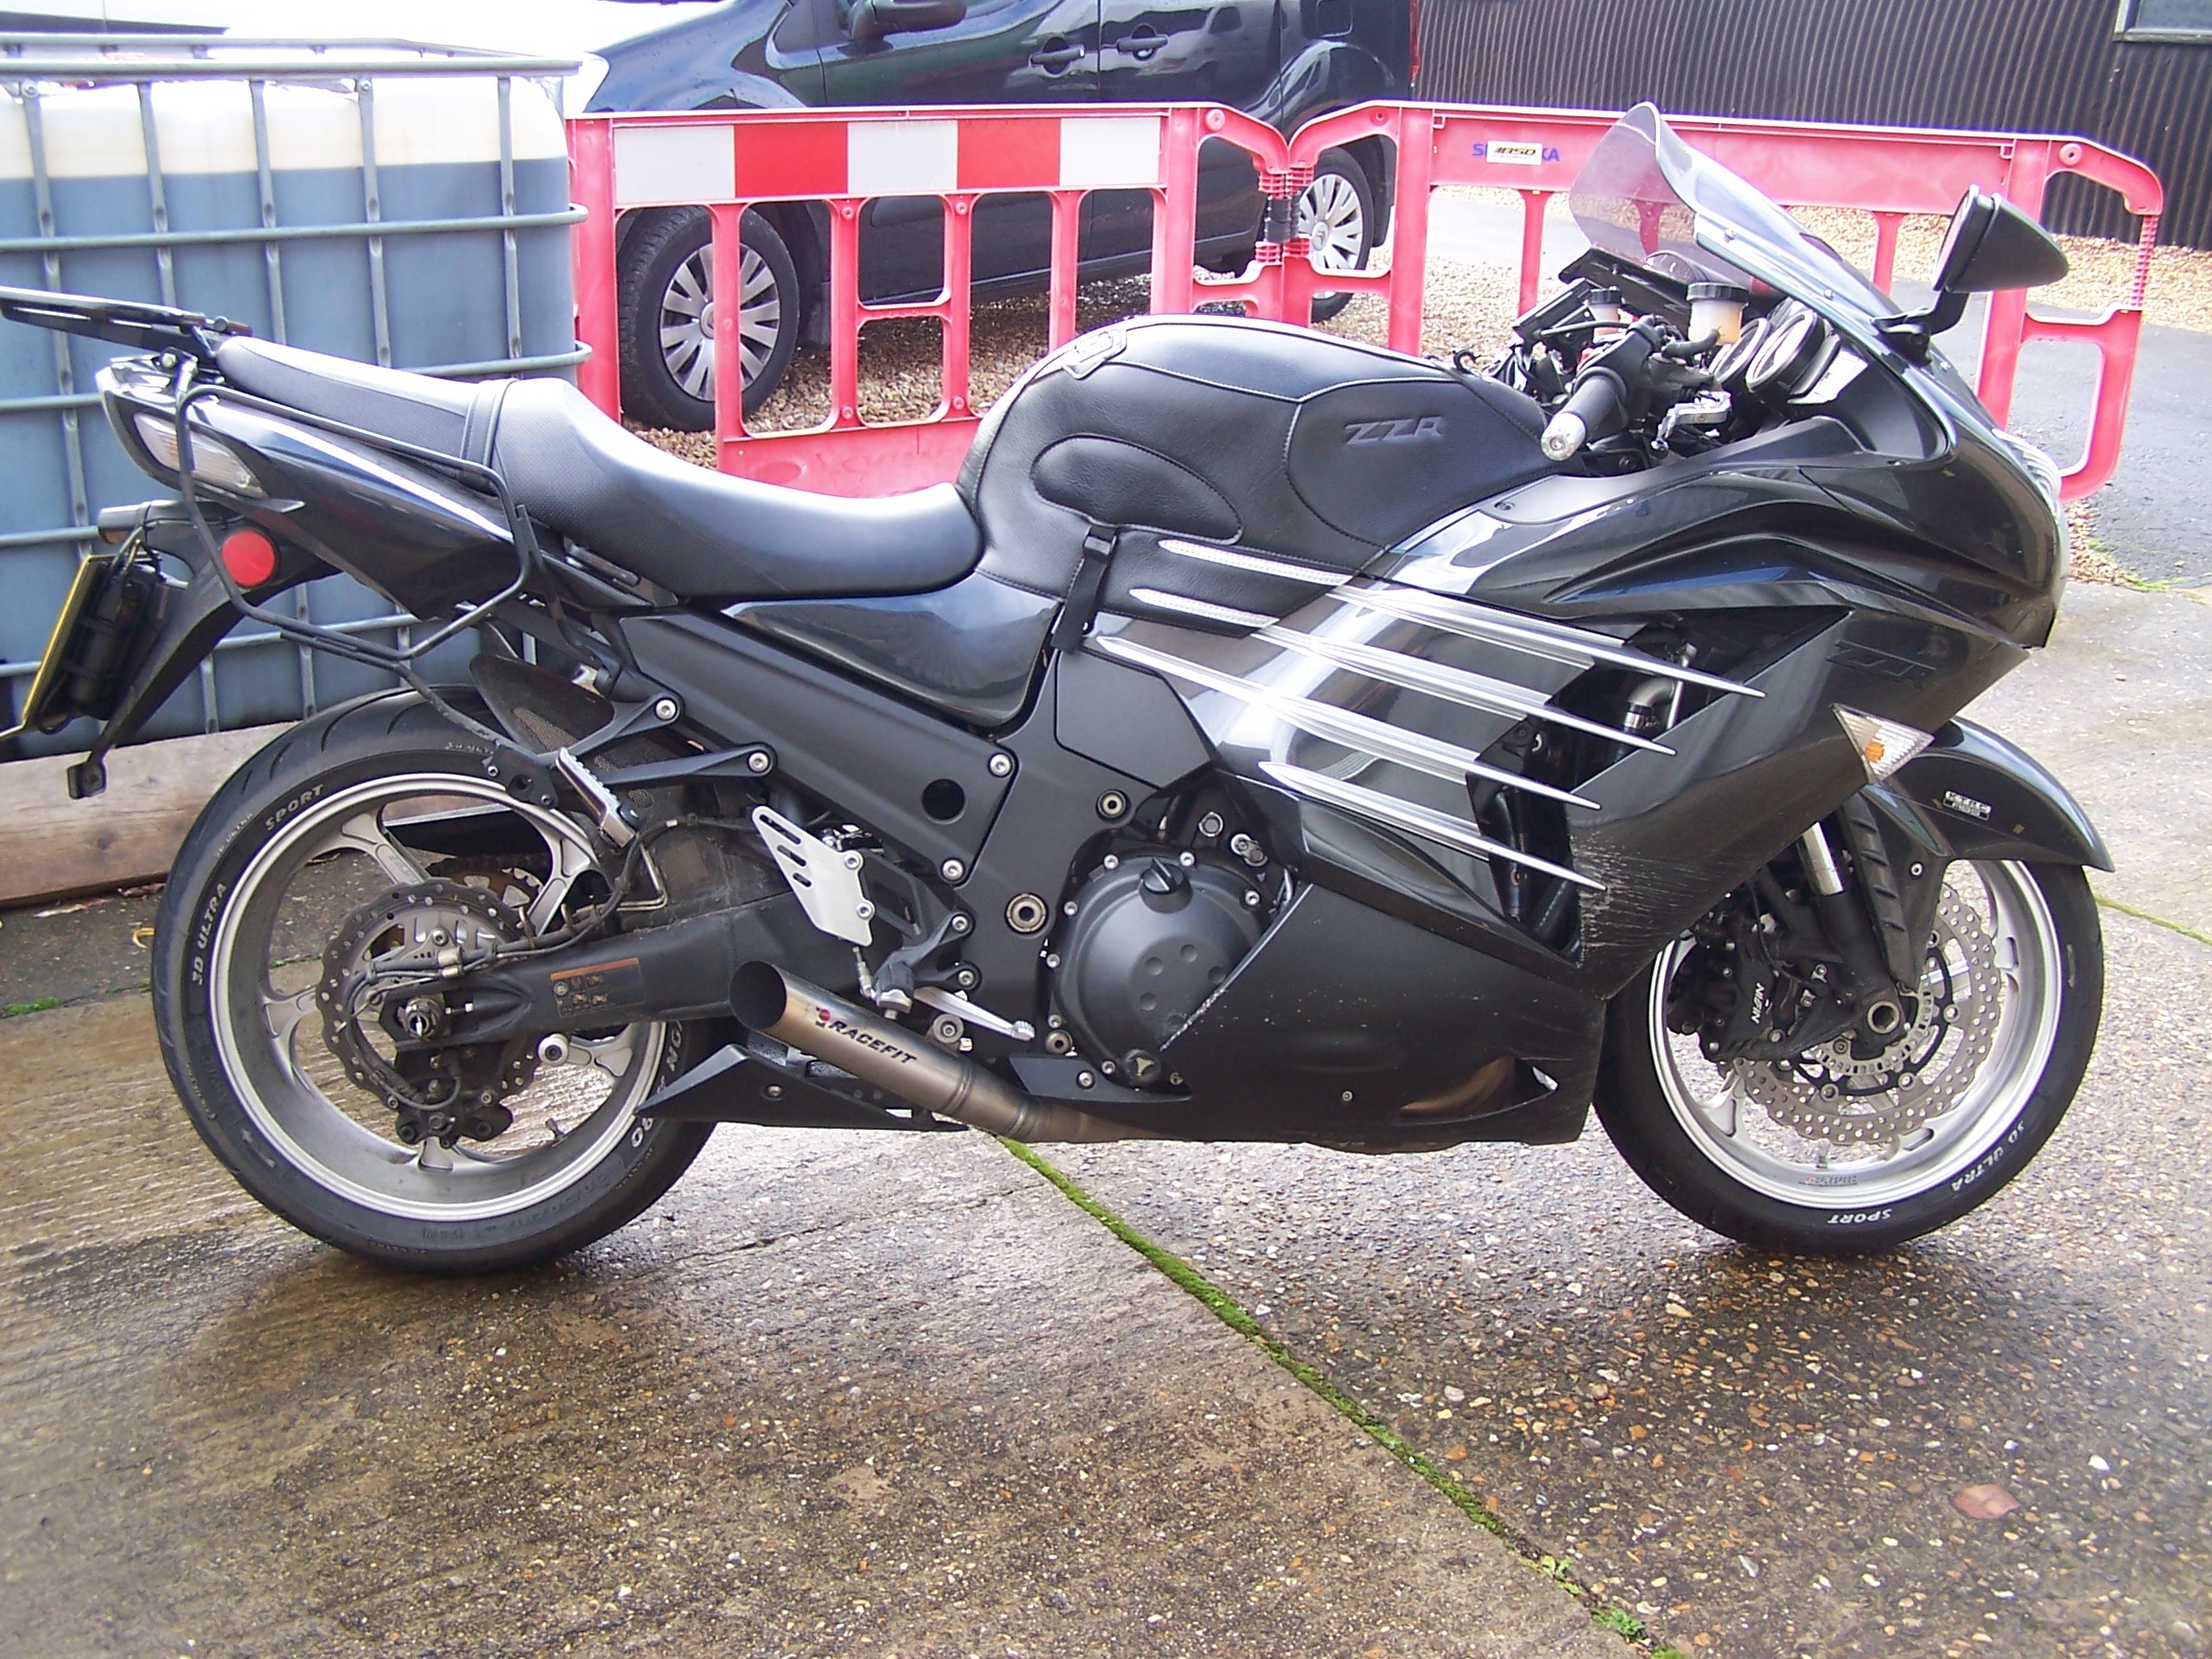 ZZR1400 – ECU remapped when brand new, back for a tweak now it’s done some miles…